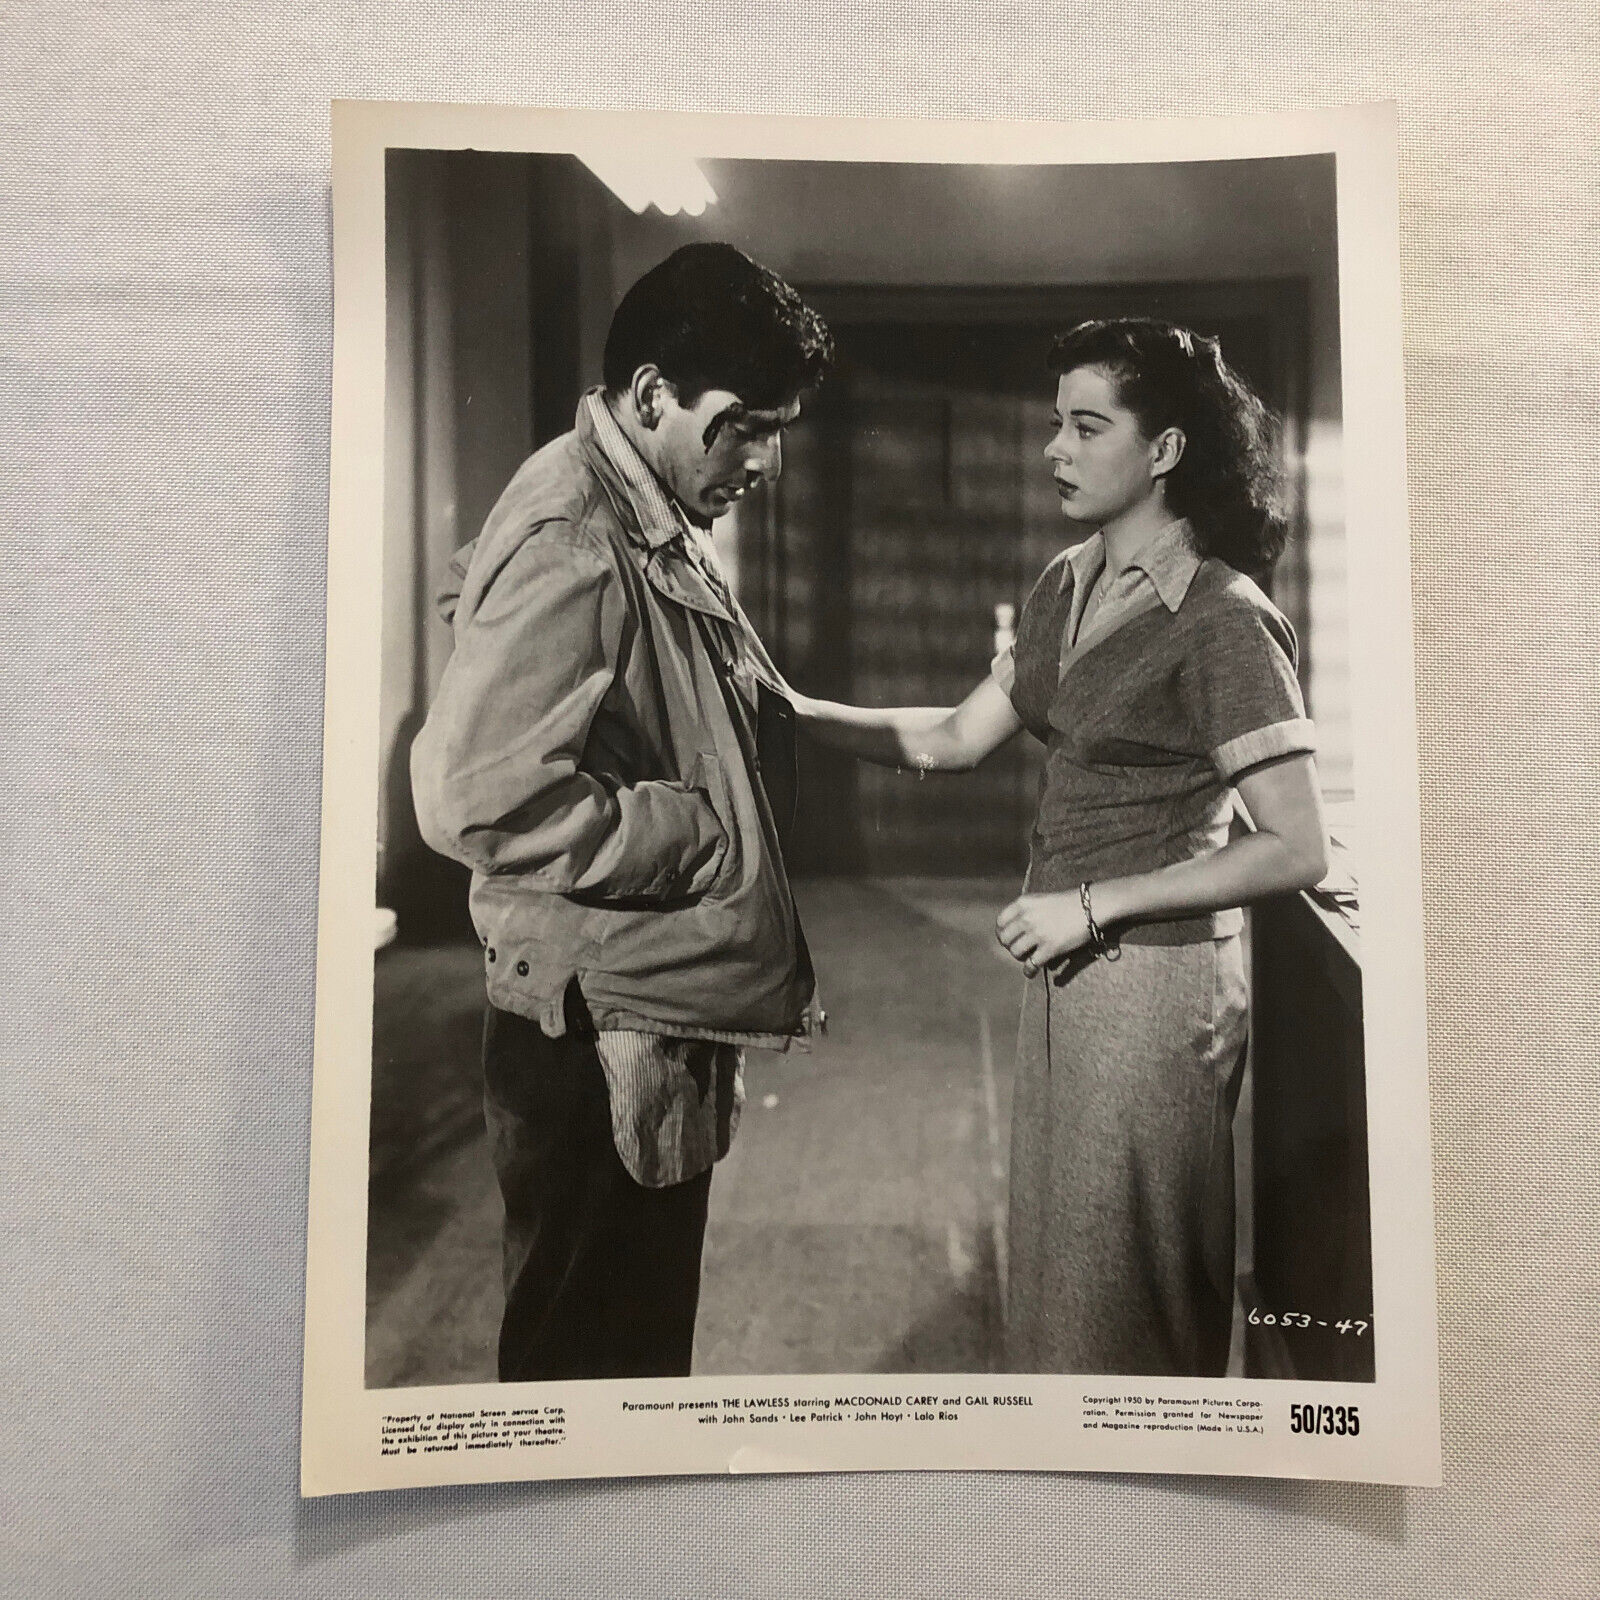 The Lawless Movie Film Photo Photograph MacDonald Carey Gail Russell 1950